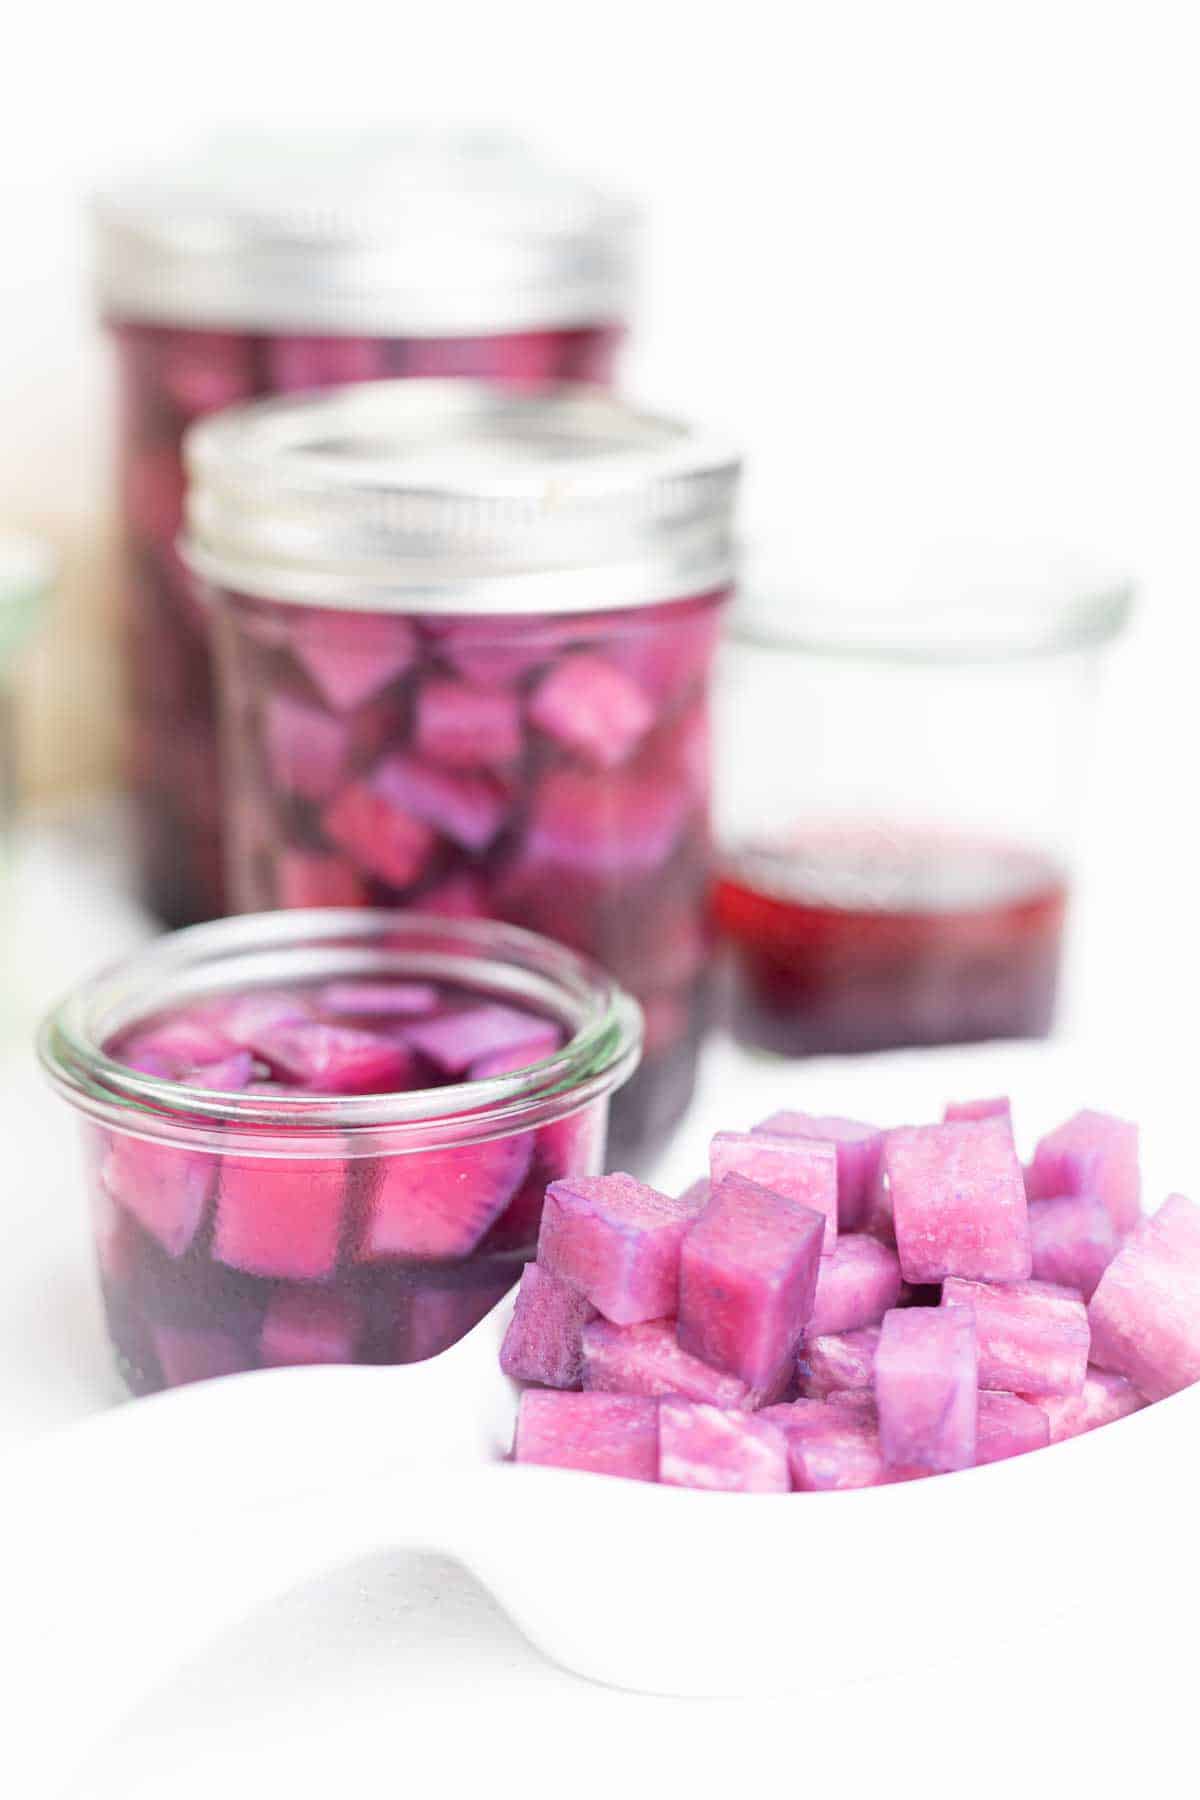 Jars of purple pickles on a white table.